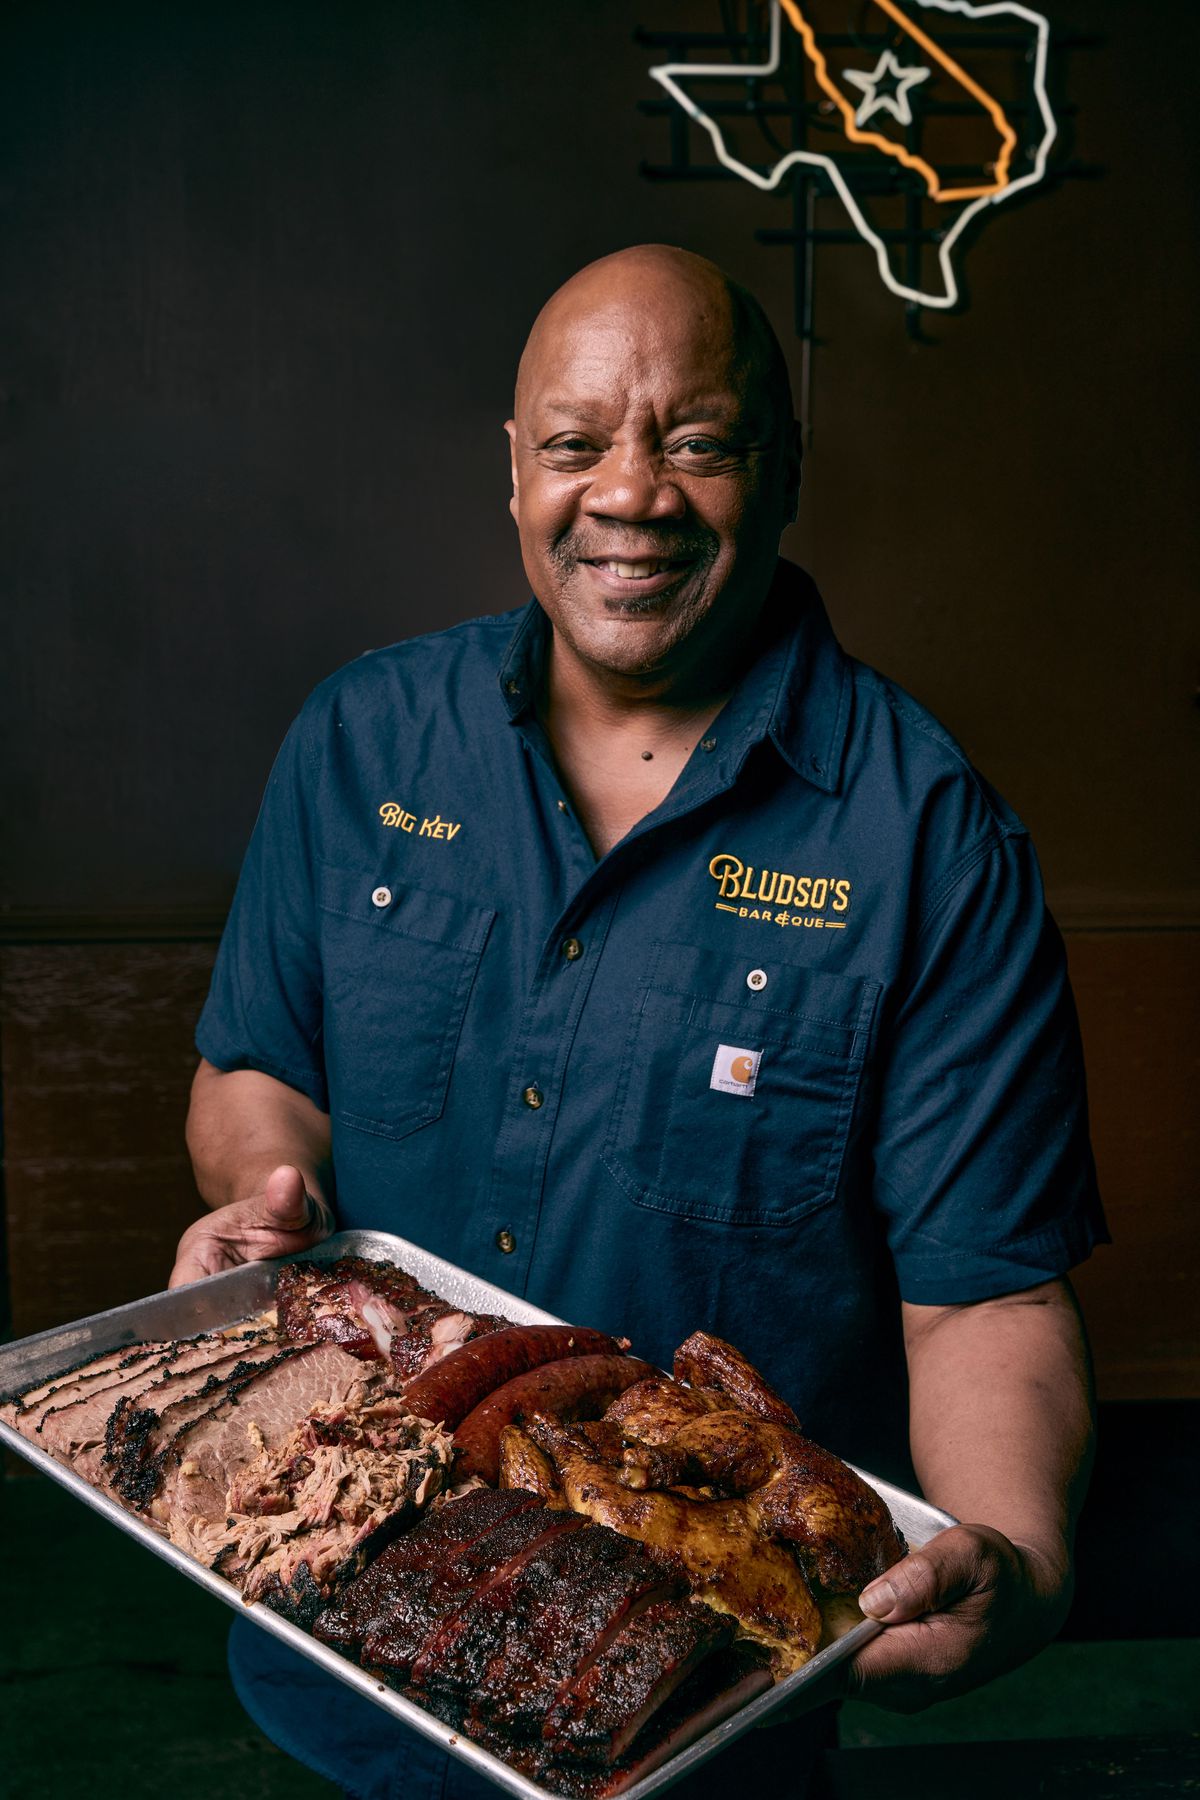 A bald Black man holds a metal tray of barbecue, with a smile.